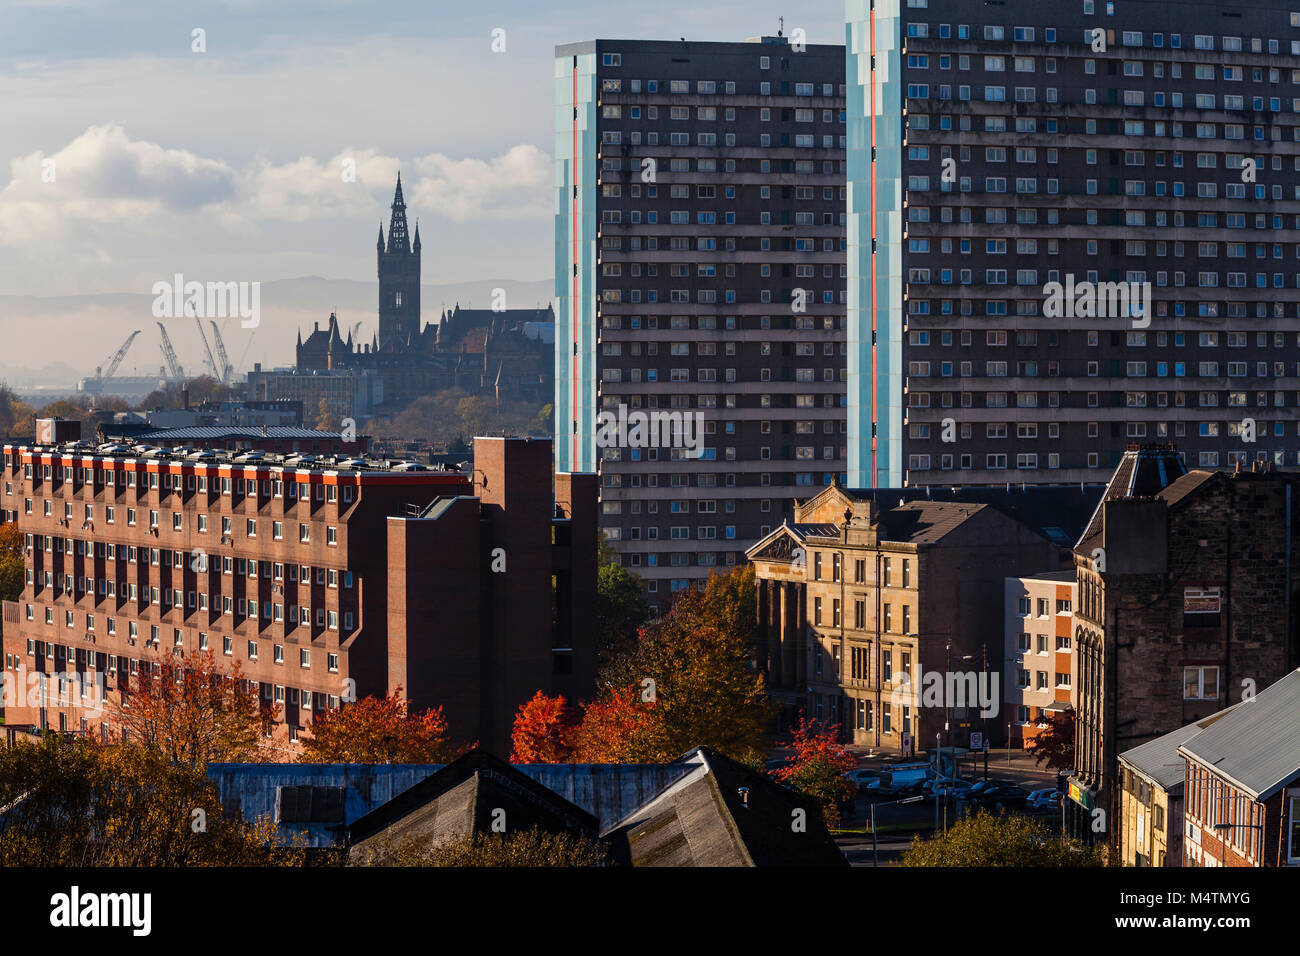 Glasgow skyline view looking over social housing towards the University of Glasgow bell tower with shipyard cranes in the background, Scotland, UK Stock Photo